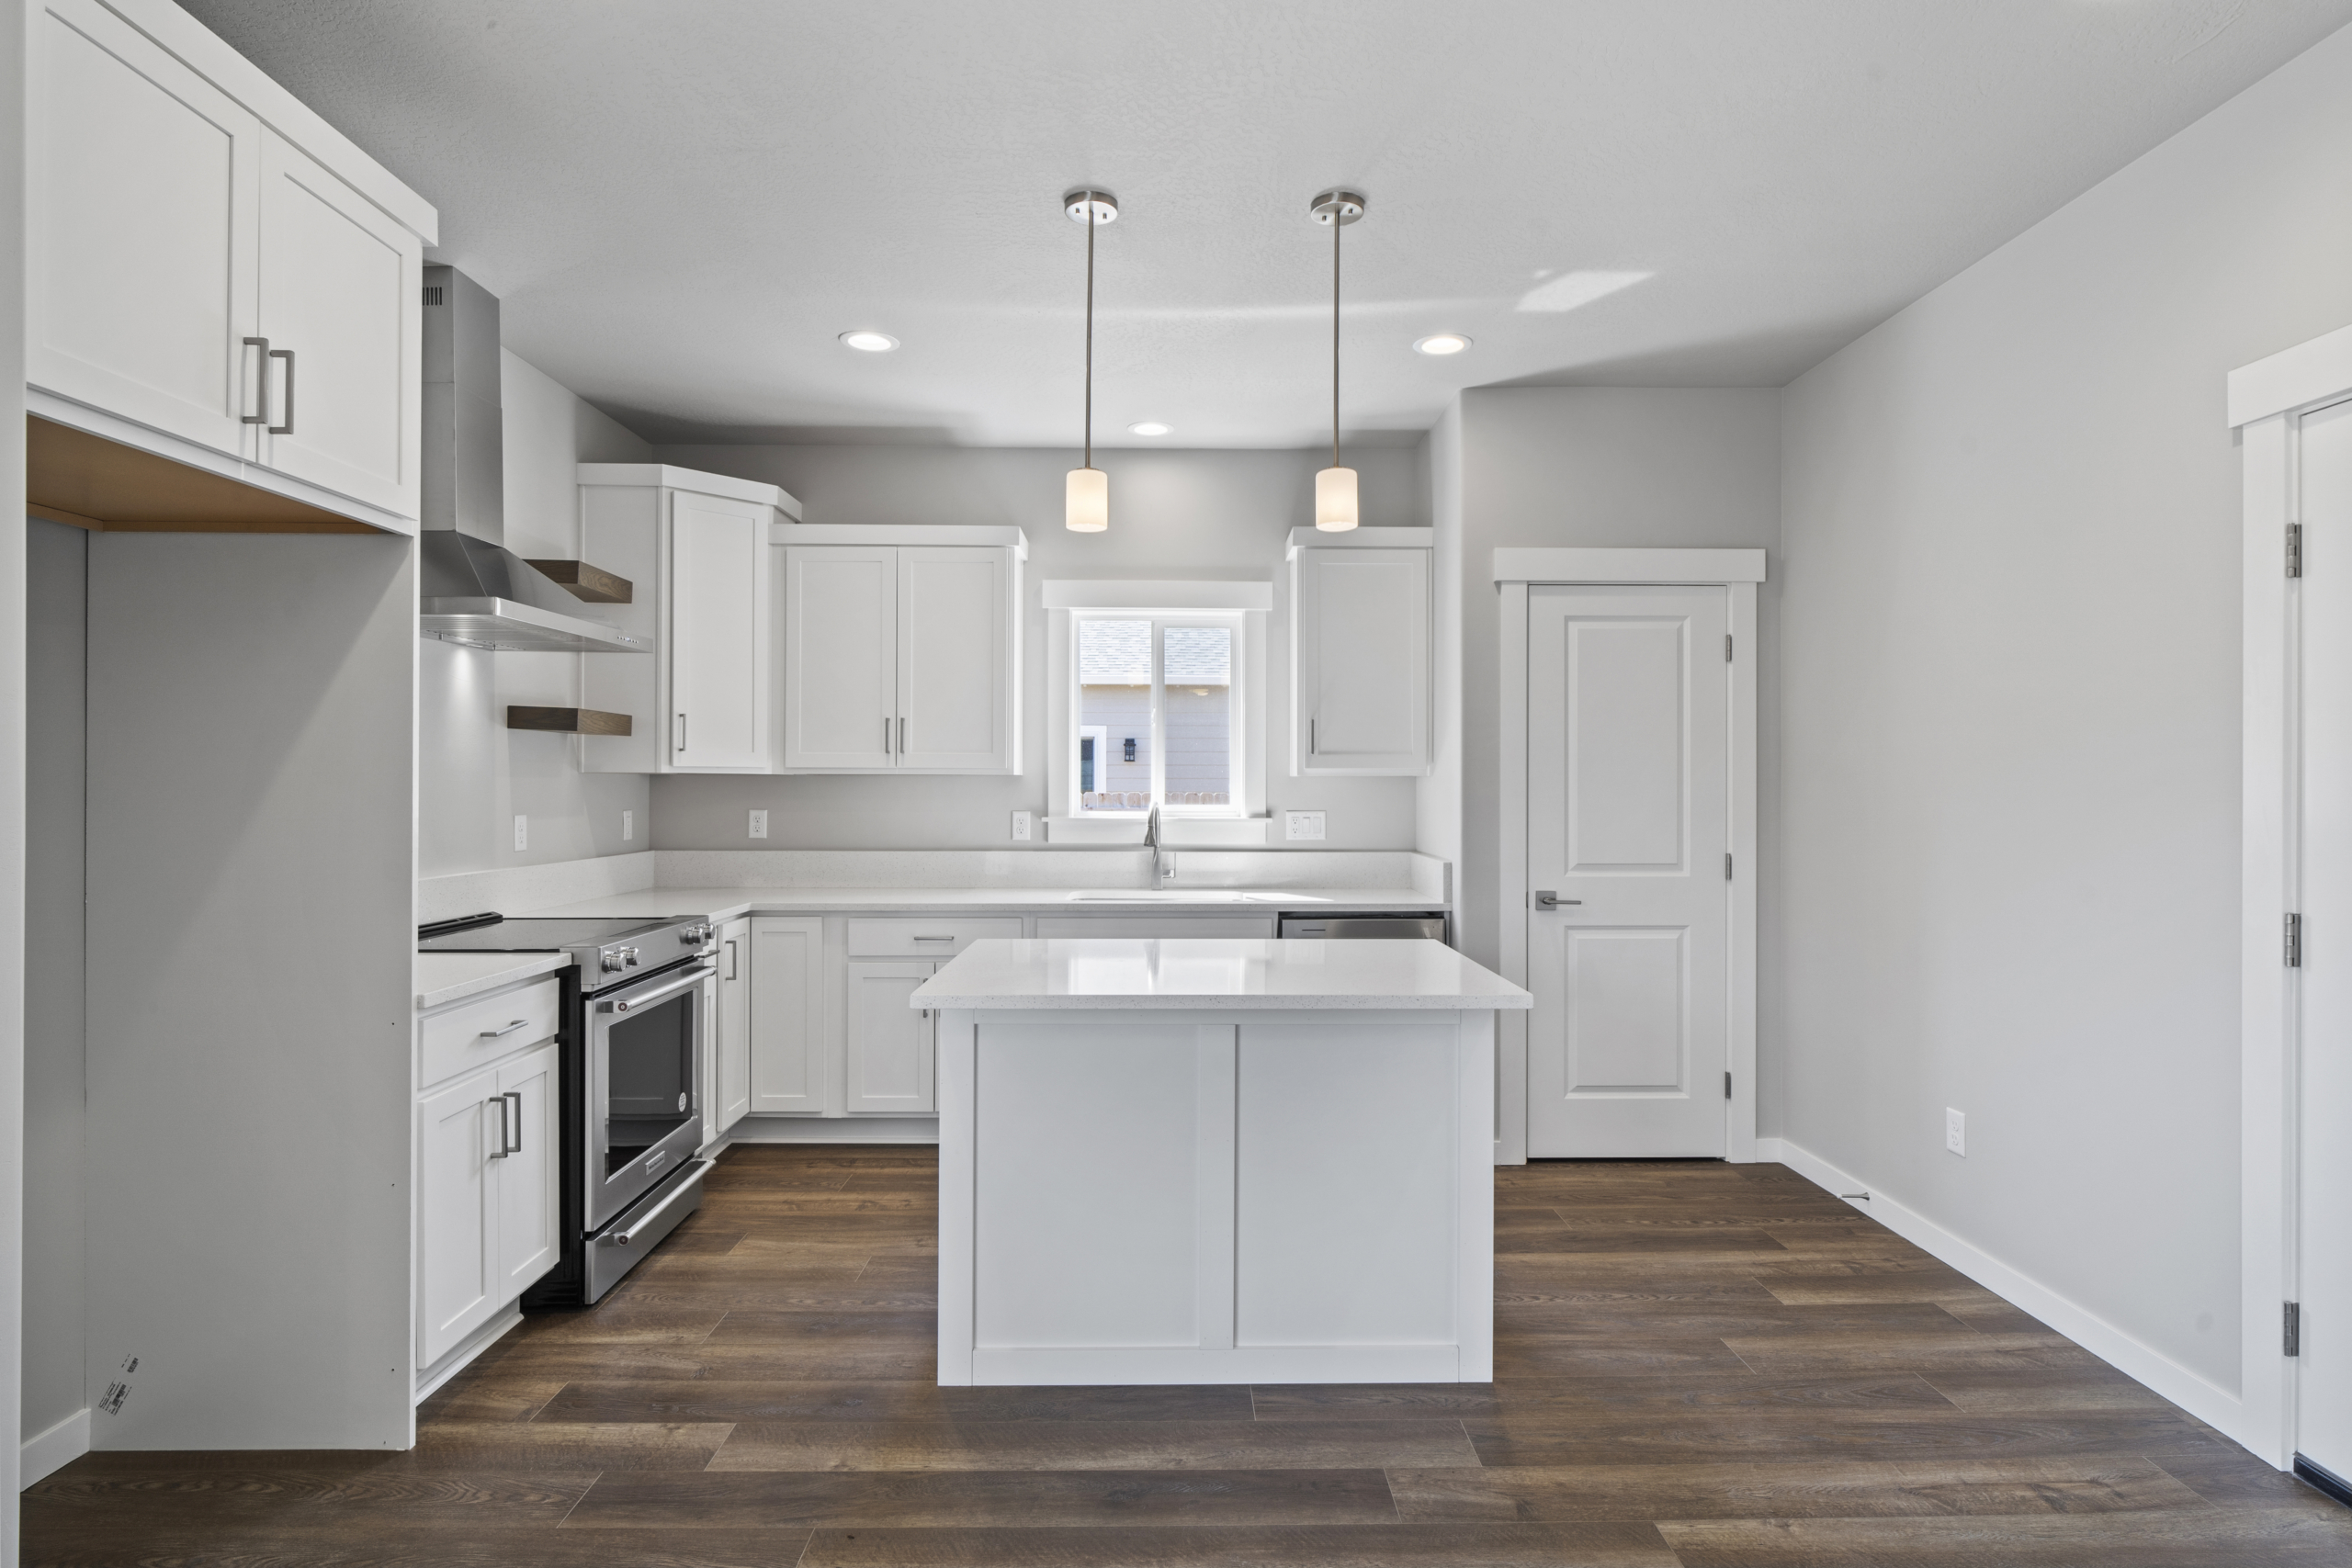 An inviting kitchen with sleek white countertops and modern stainless-steel appliances, including a prominent oven. Natural light streams in through a charming window, adding warmth to the space."